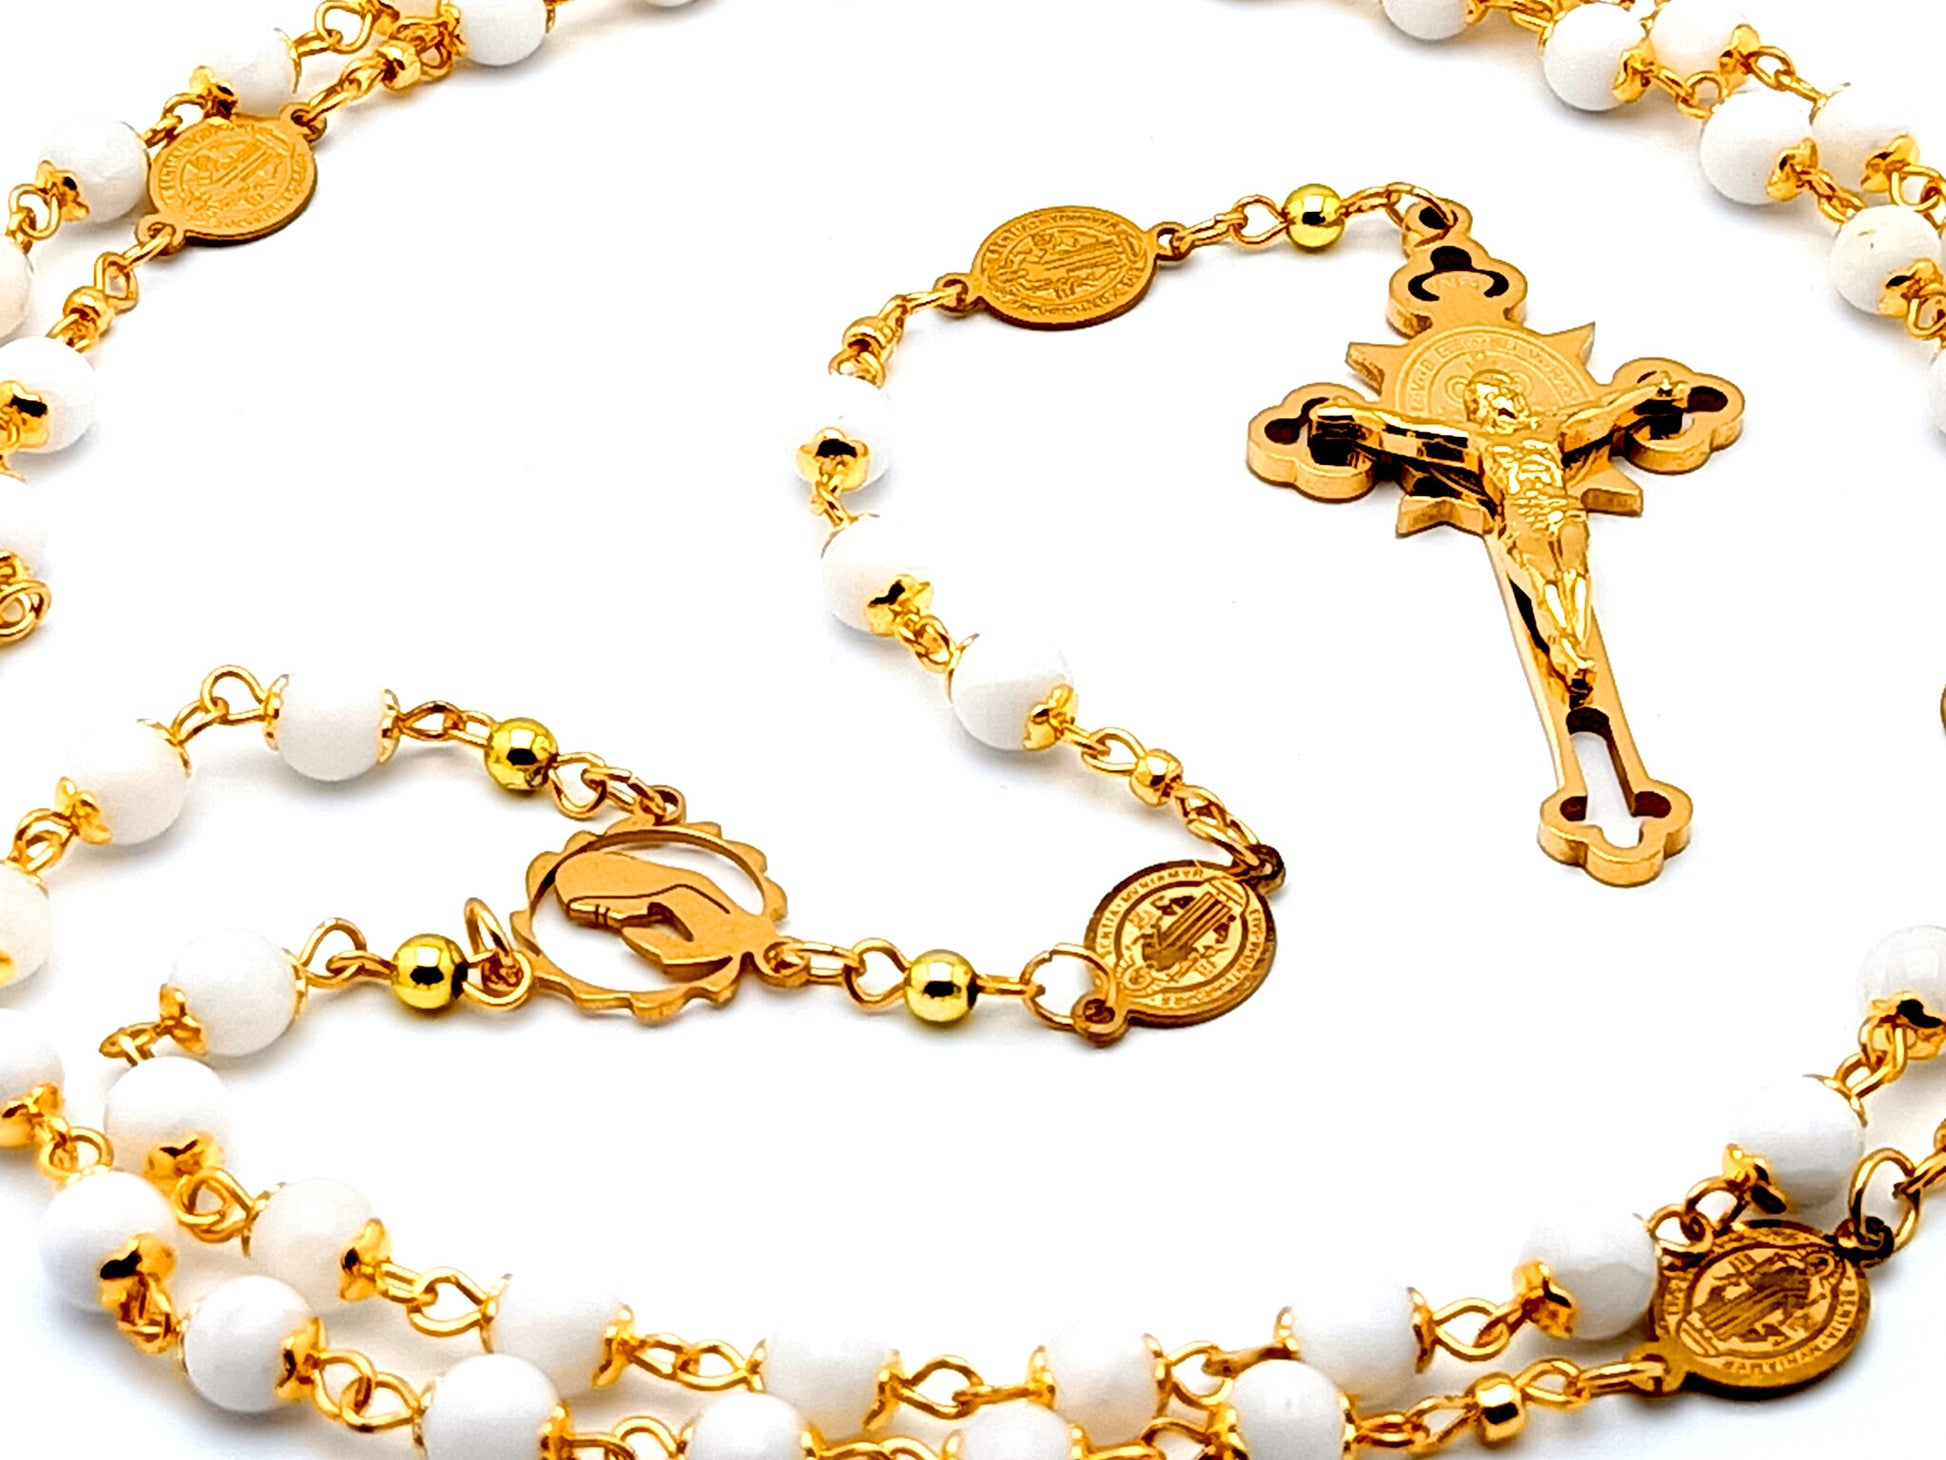 Virgin Mary unique rosary beads with gold and mother of pearl beads and Saint Benedict linking medals and gold plated Saint Benedict engraved crucifix.